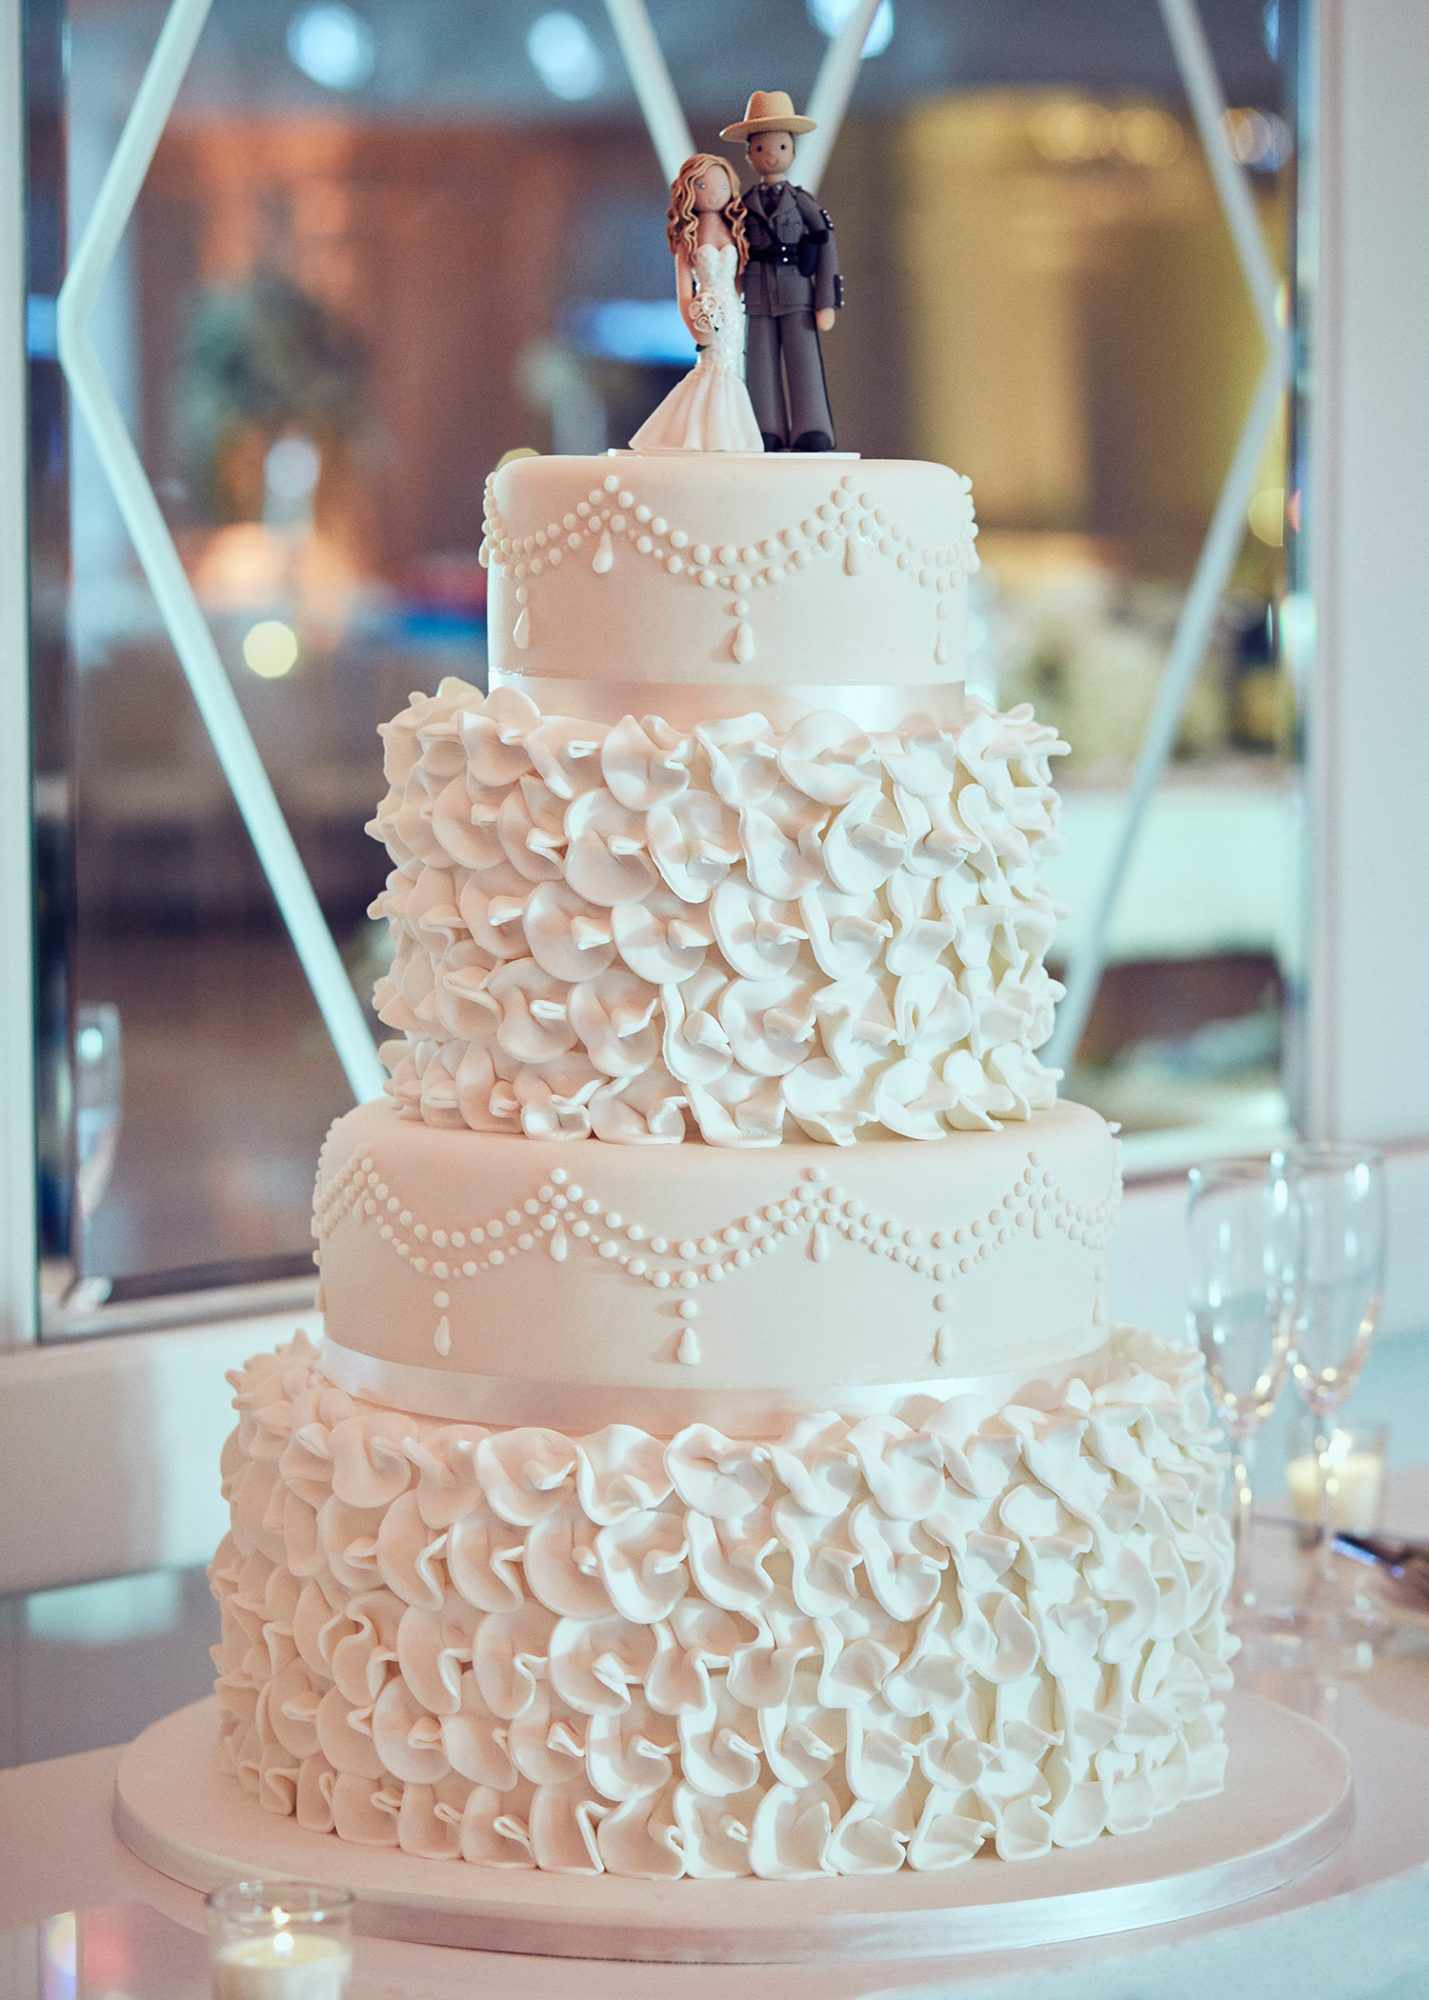 shqipe zenel wedding cake with couple topper